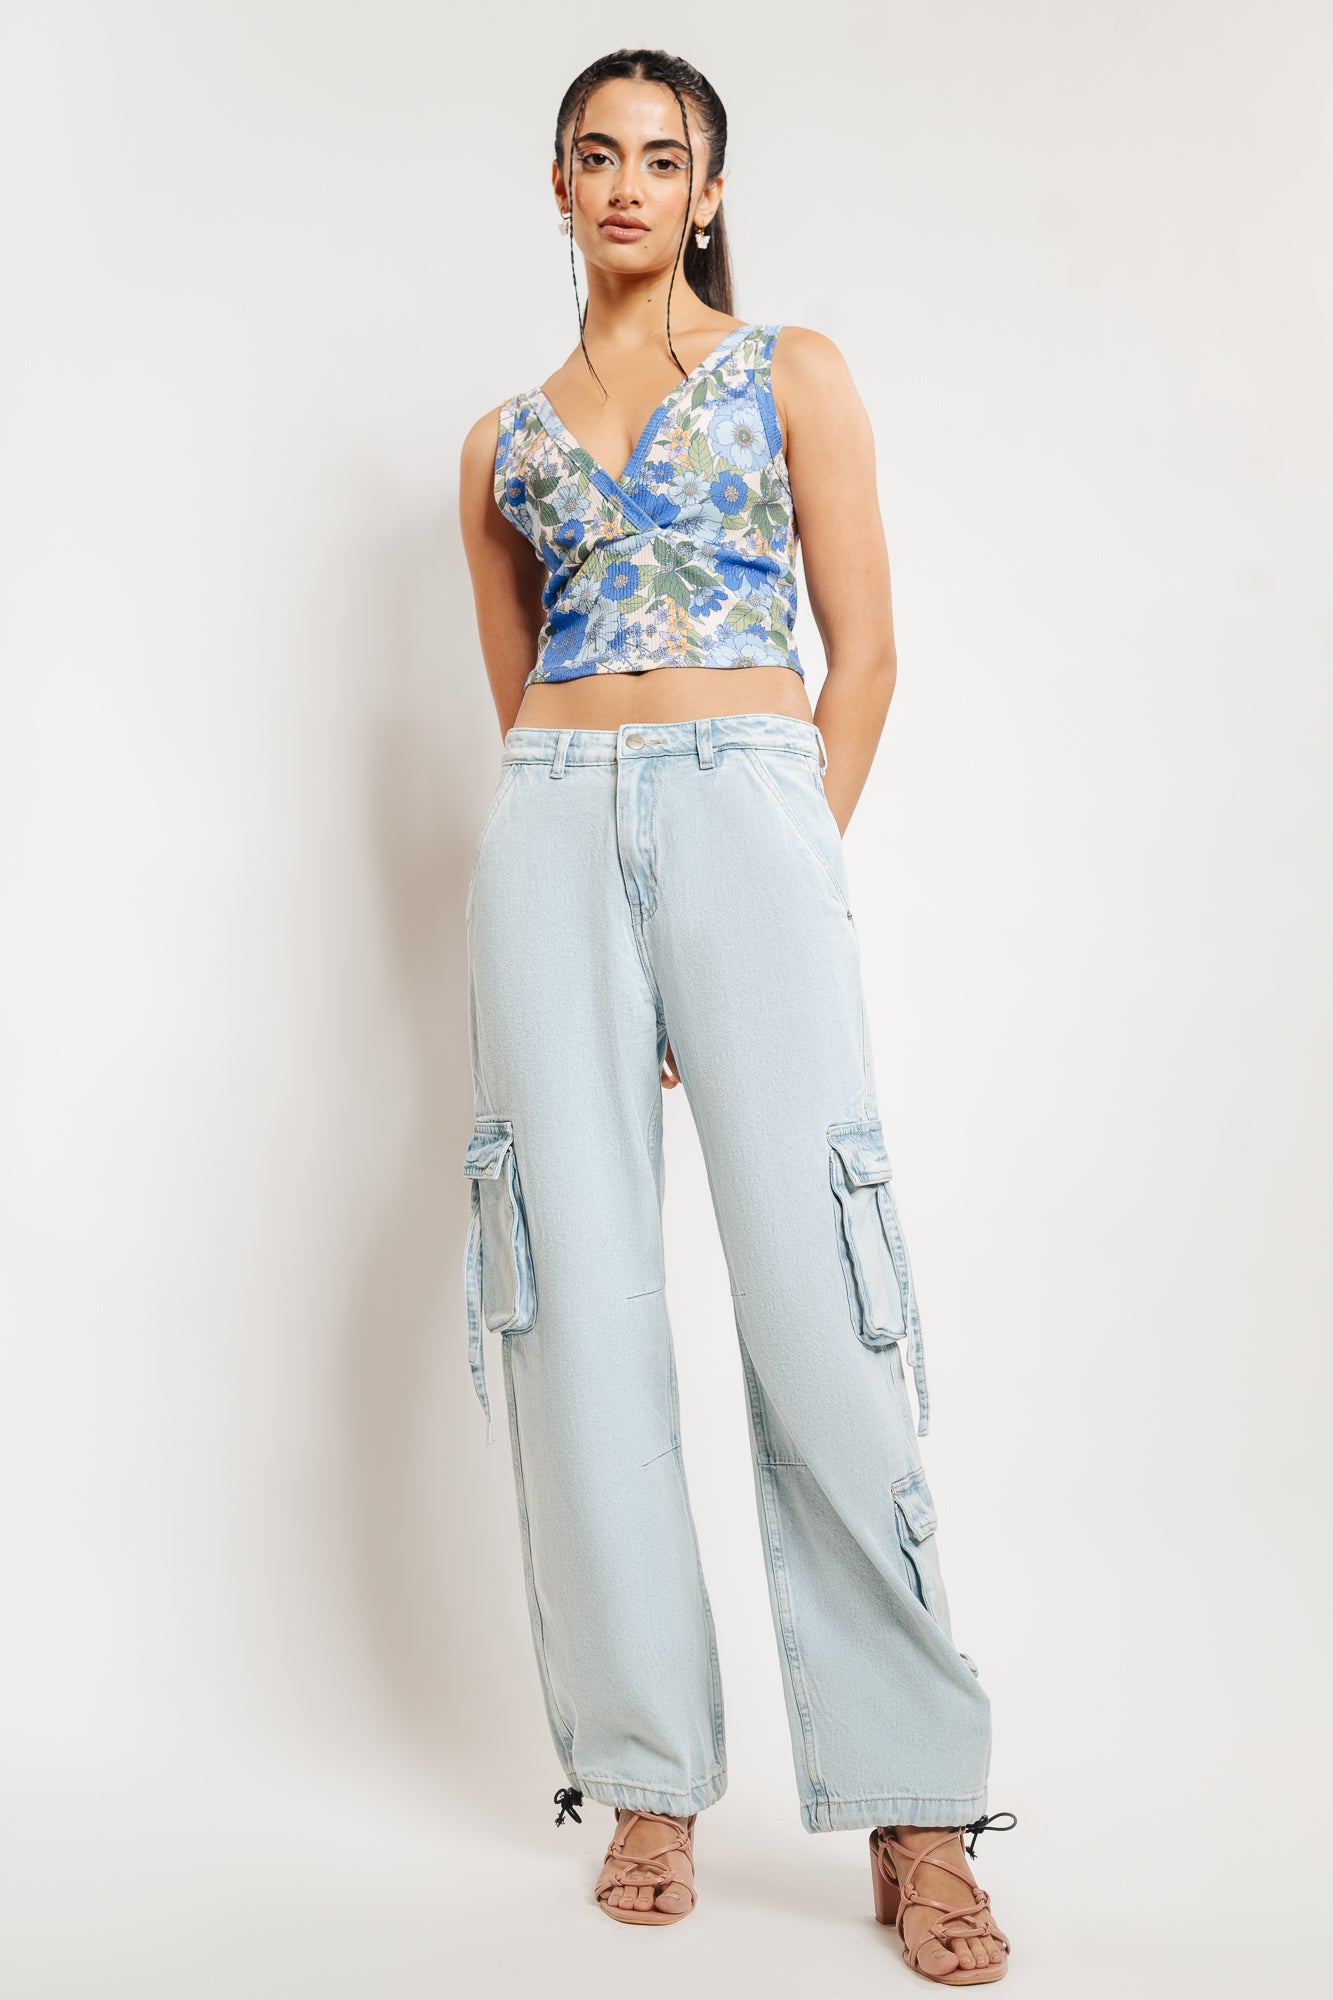 Shop for Cargo Pants for Women Online Starting @ ₹999 – Page 3